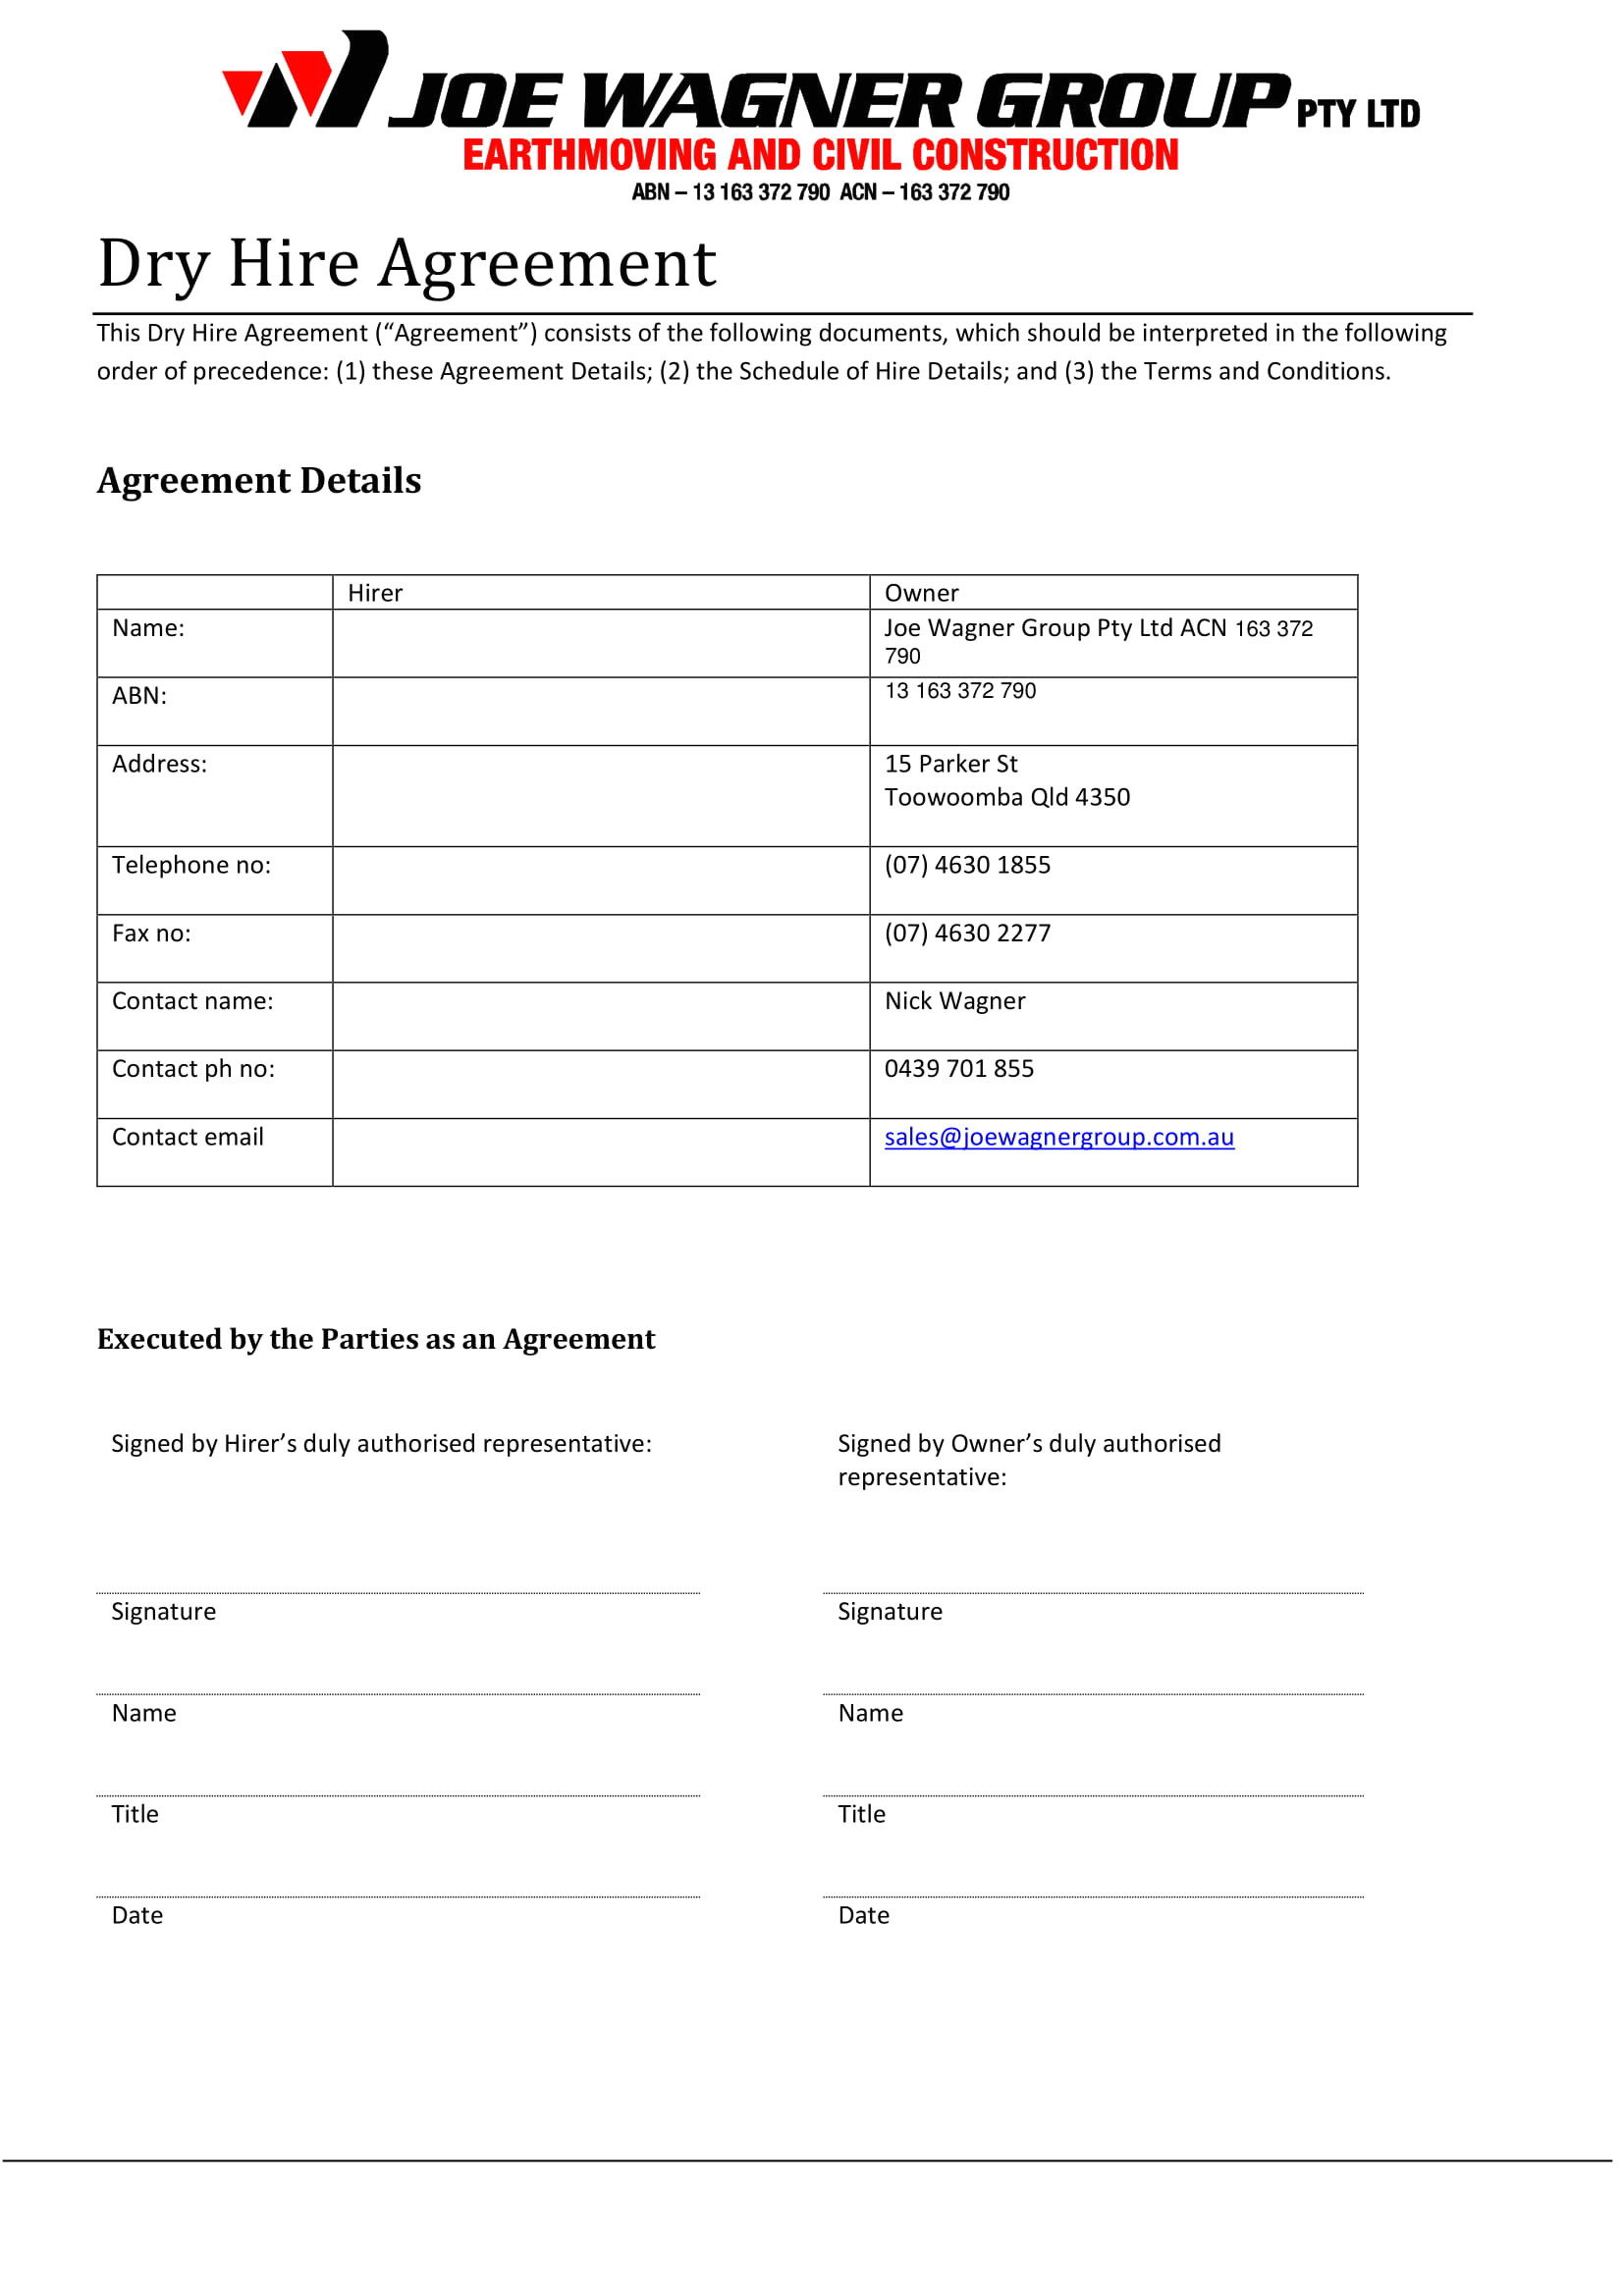 Dry Hire Contract Template 10 Hire Agreement Contract forms Pdf Doc